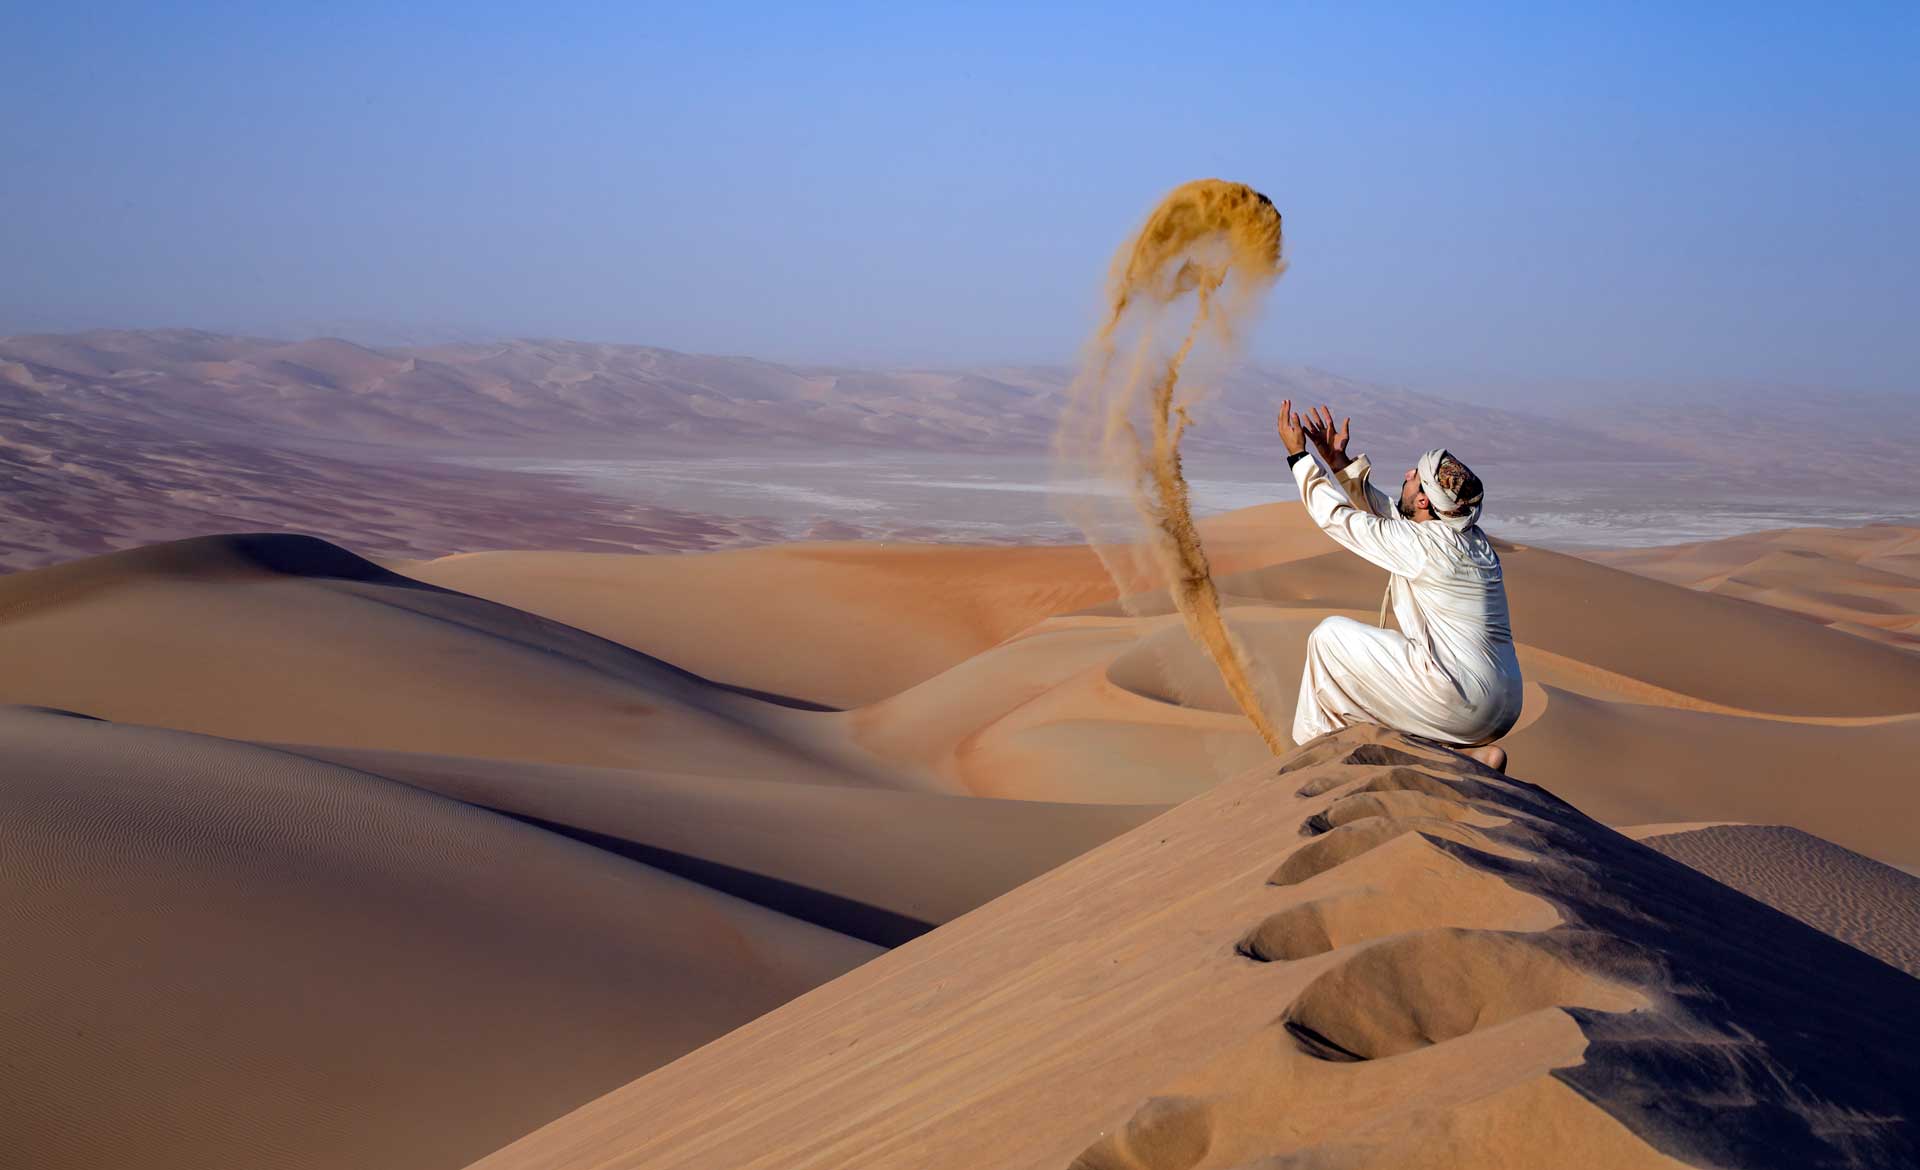 Man in traditional outfit in a desert at sunrise, throwing sand